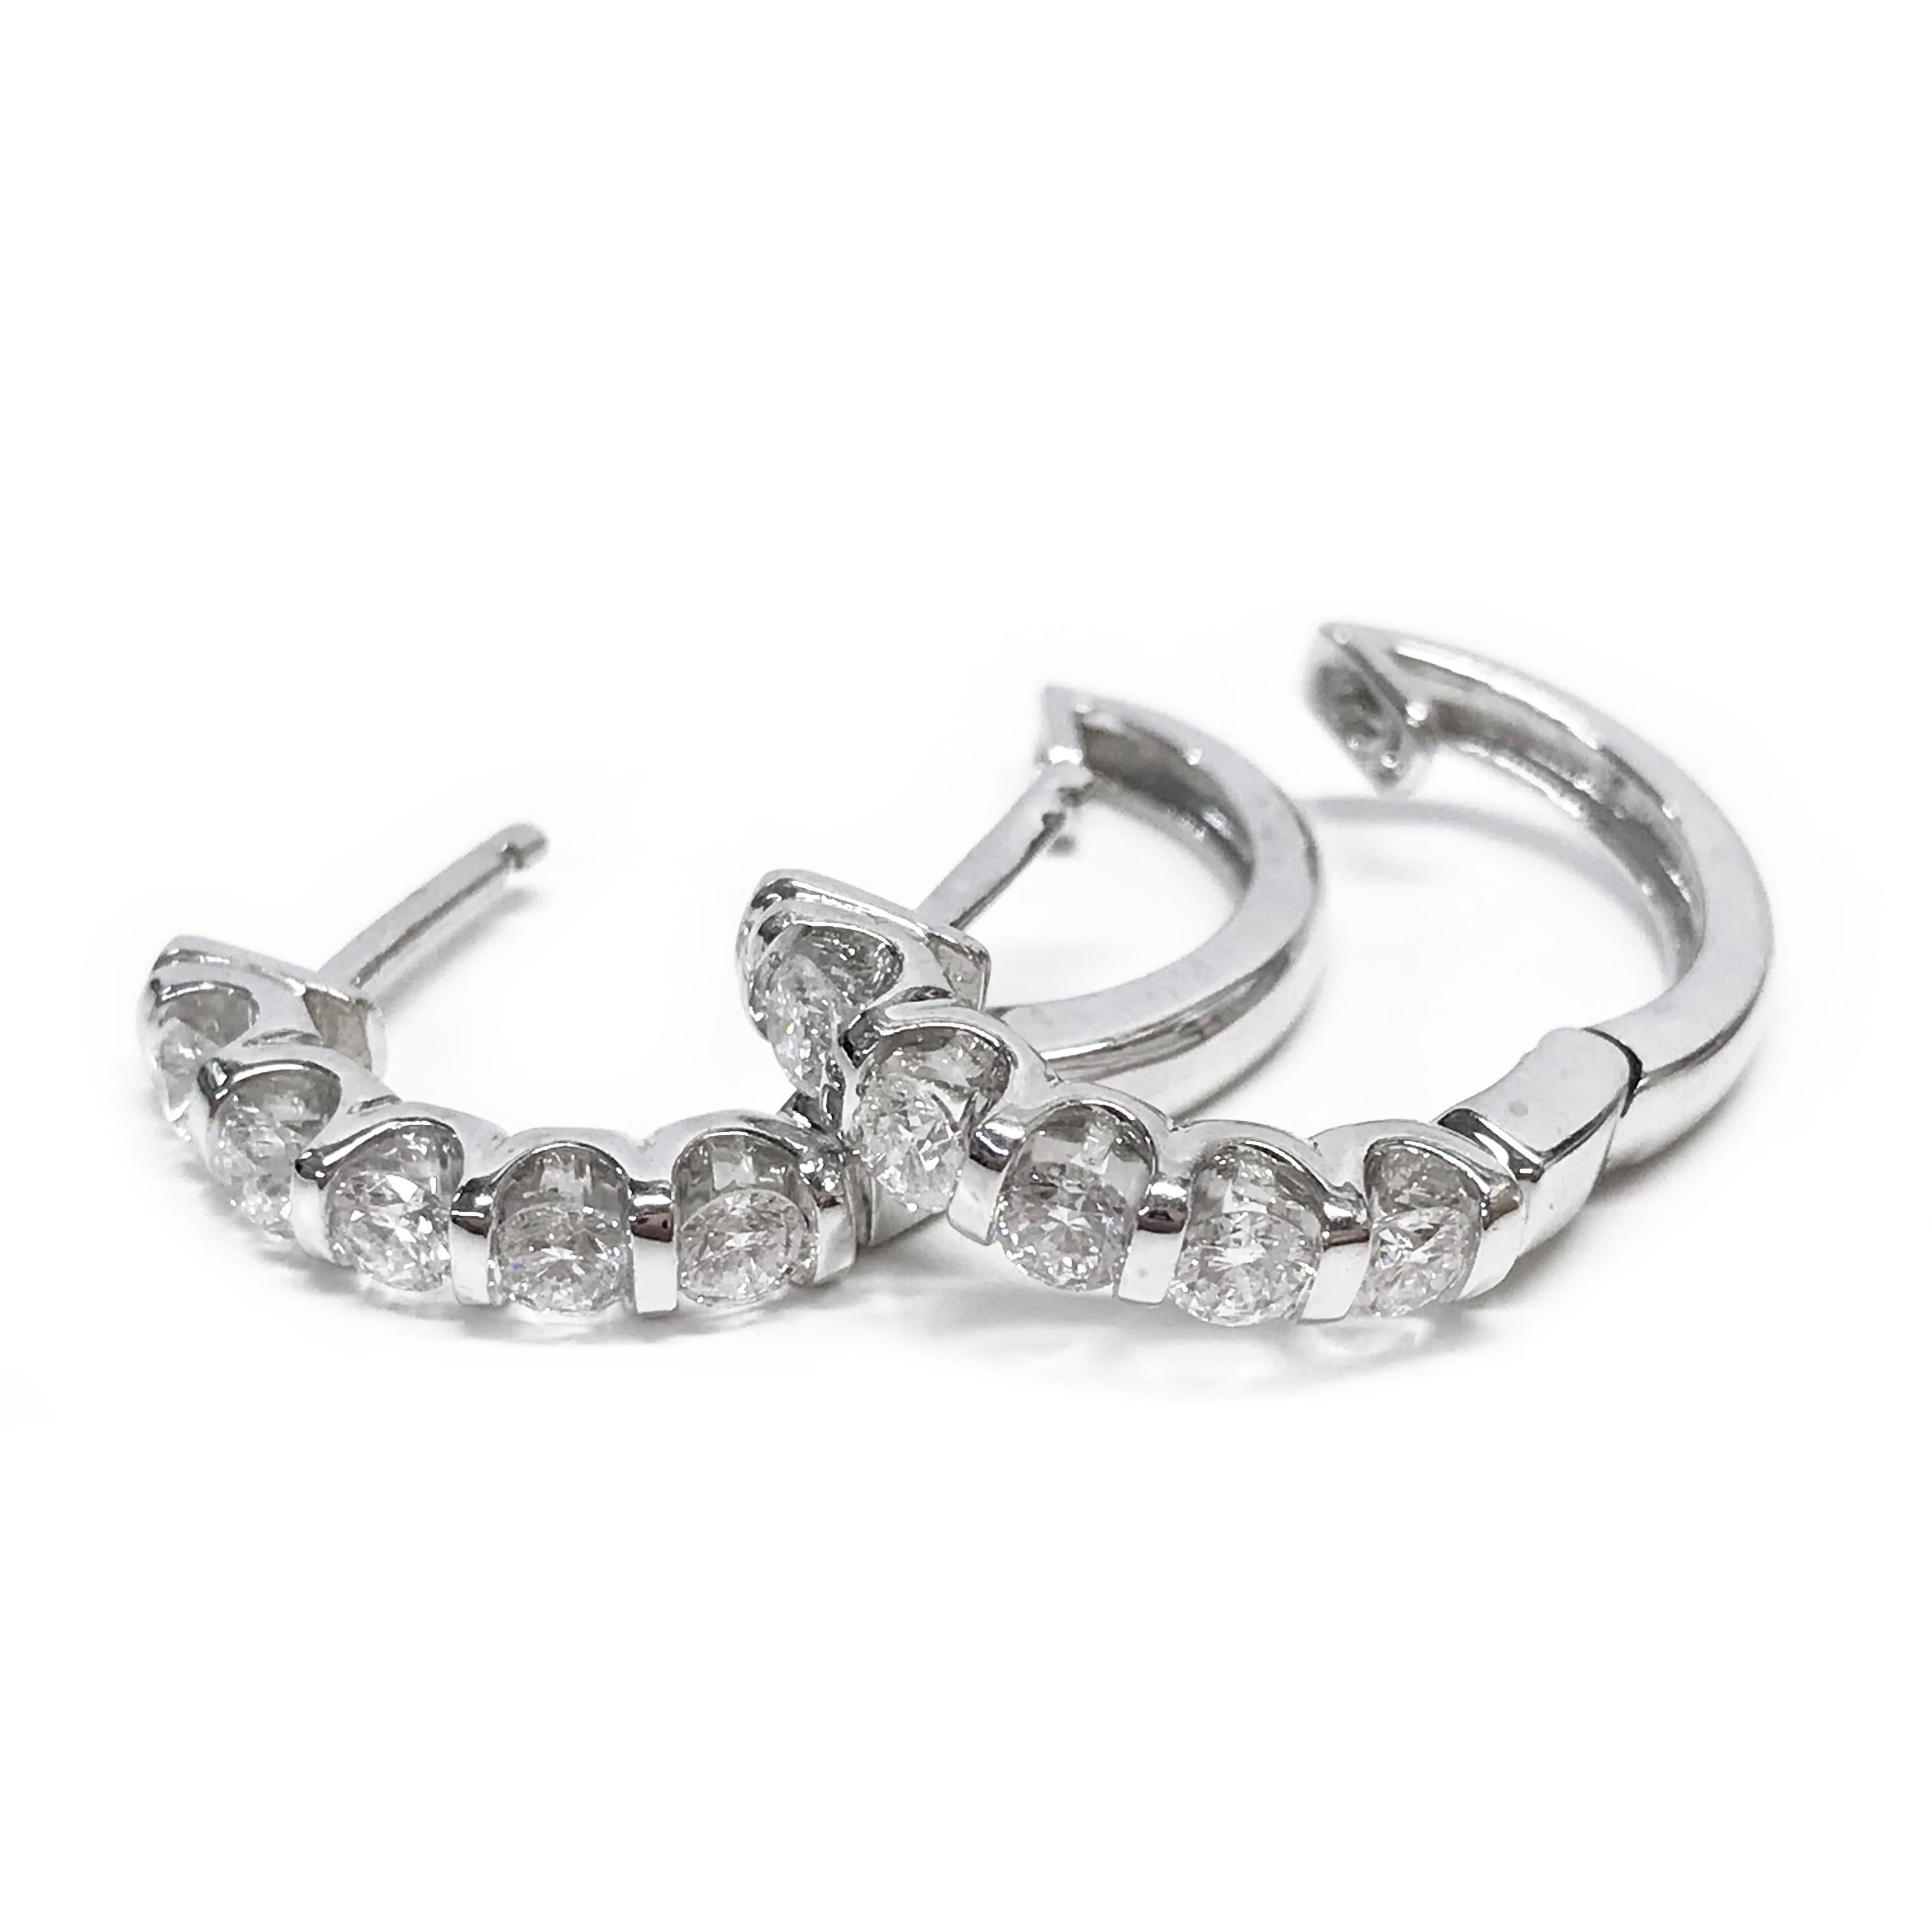 14 Karat White Gold Diamond Hoop Earrings. The petite earrings feature five 3mm bar-set round diamonds on each earring. The diamonds are SI1-SI2 (G.I.A.) in clarity and G-H (G.I.A.) in color. The total carat weight of the ten diamonds is 1.00tcw.